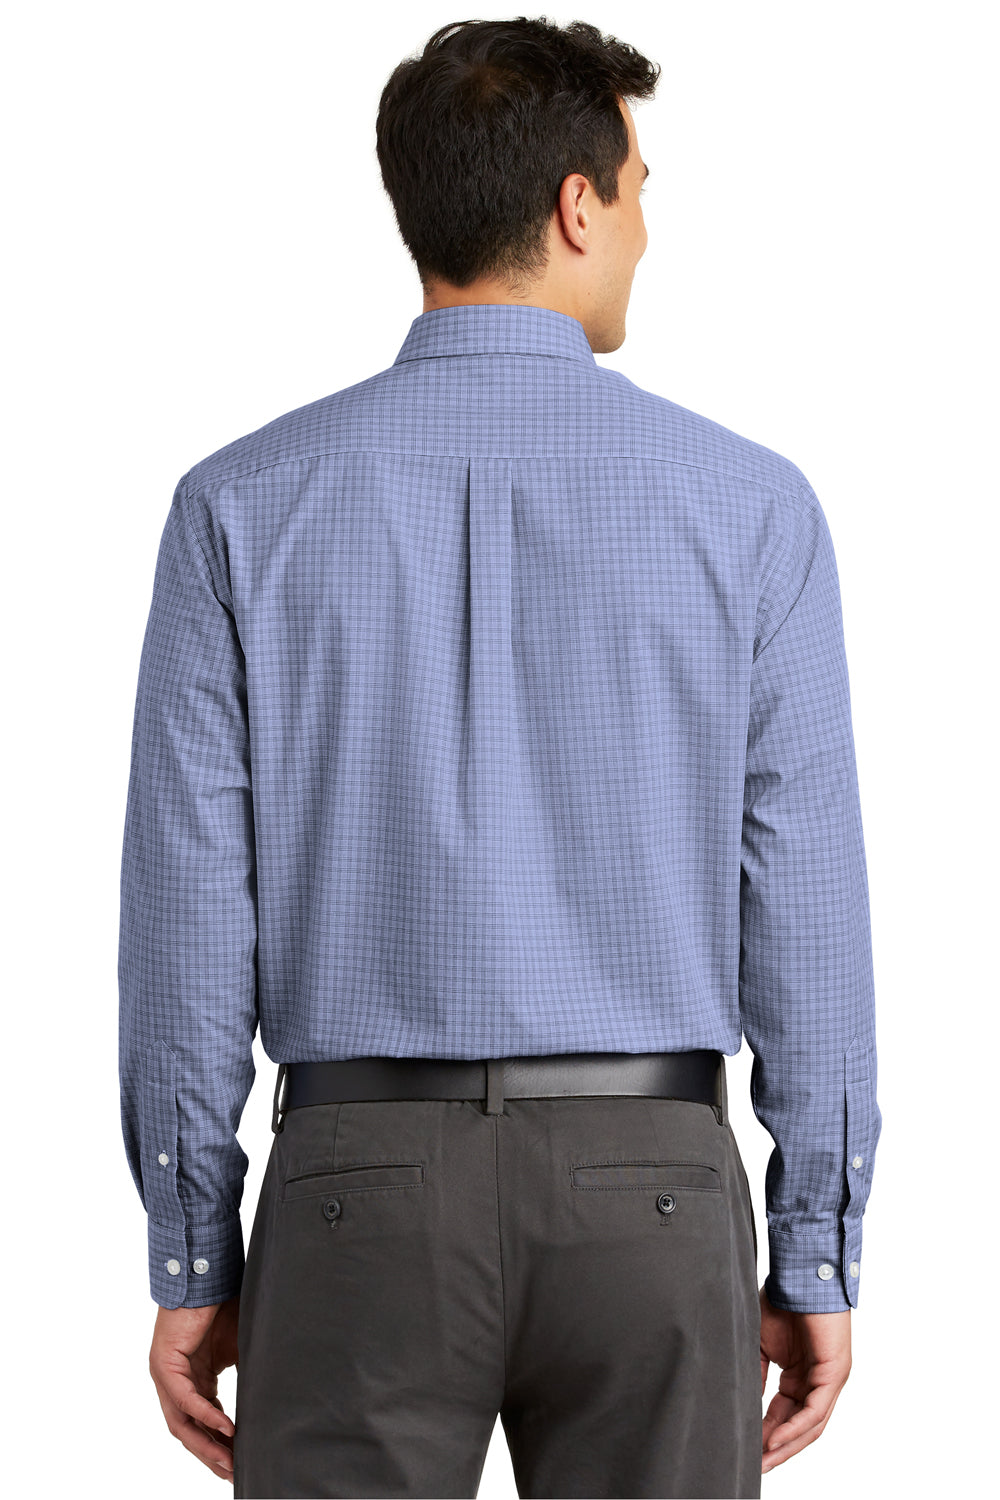 Port Authority S639 Mens Easy Care Wrinkle Resistant Long Sleeve Button Down Shirt w/ Pocket Navy Blue Back